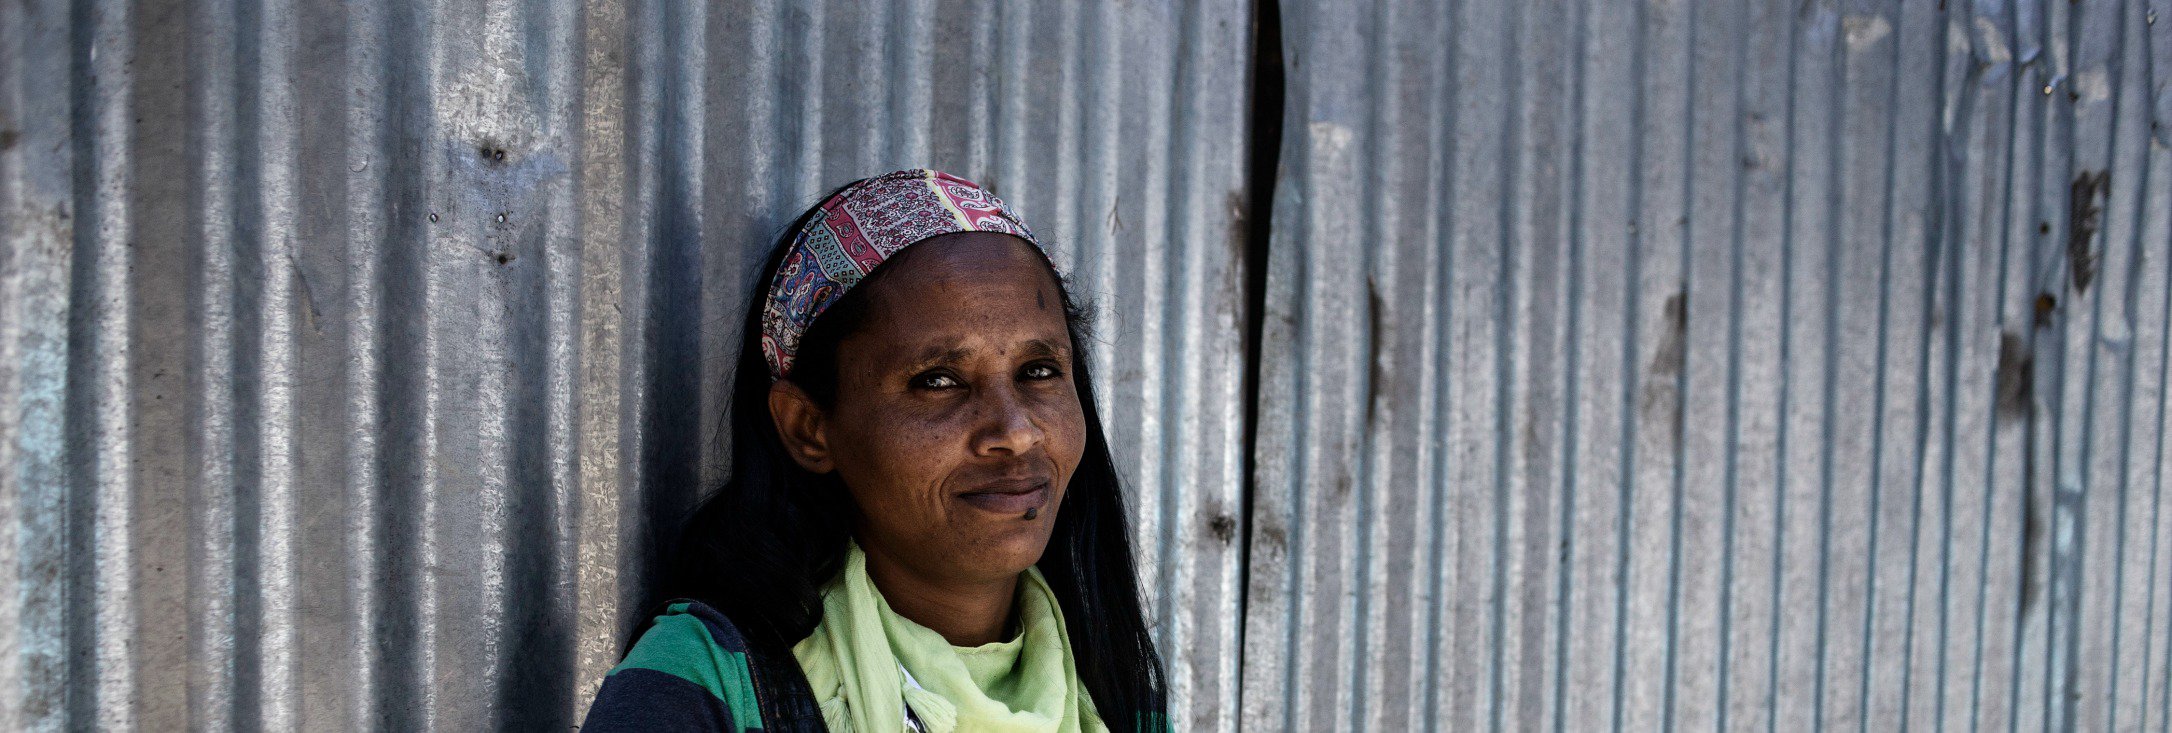 Tirhas, 35, has been in Ethiopia for six years but is not permitted to work